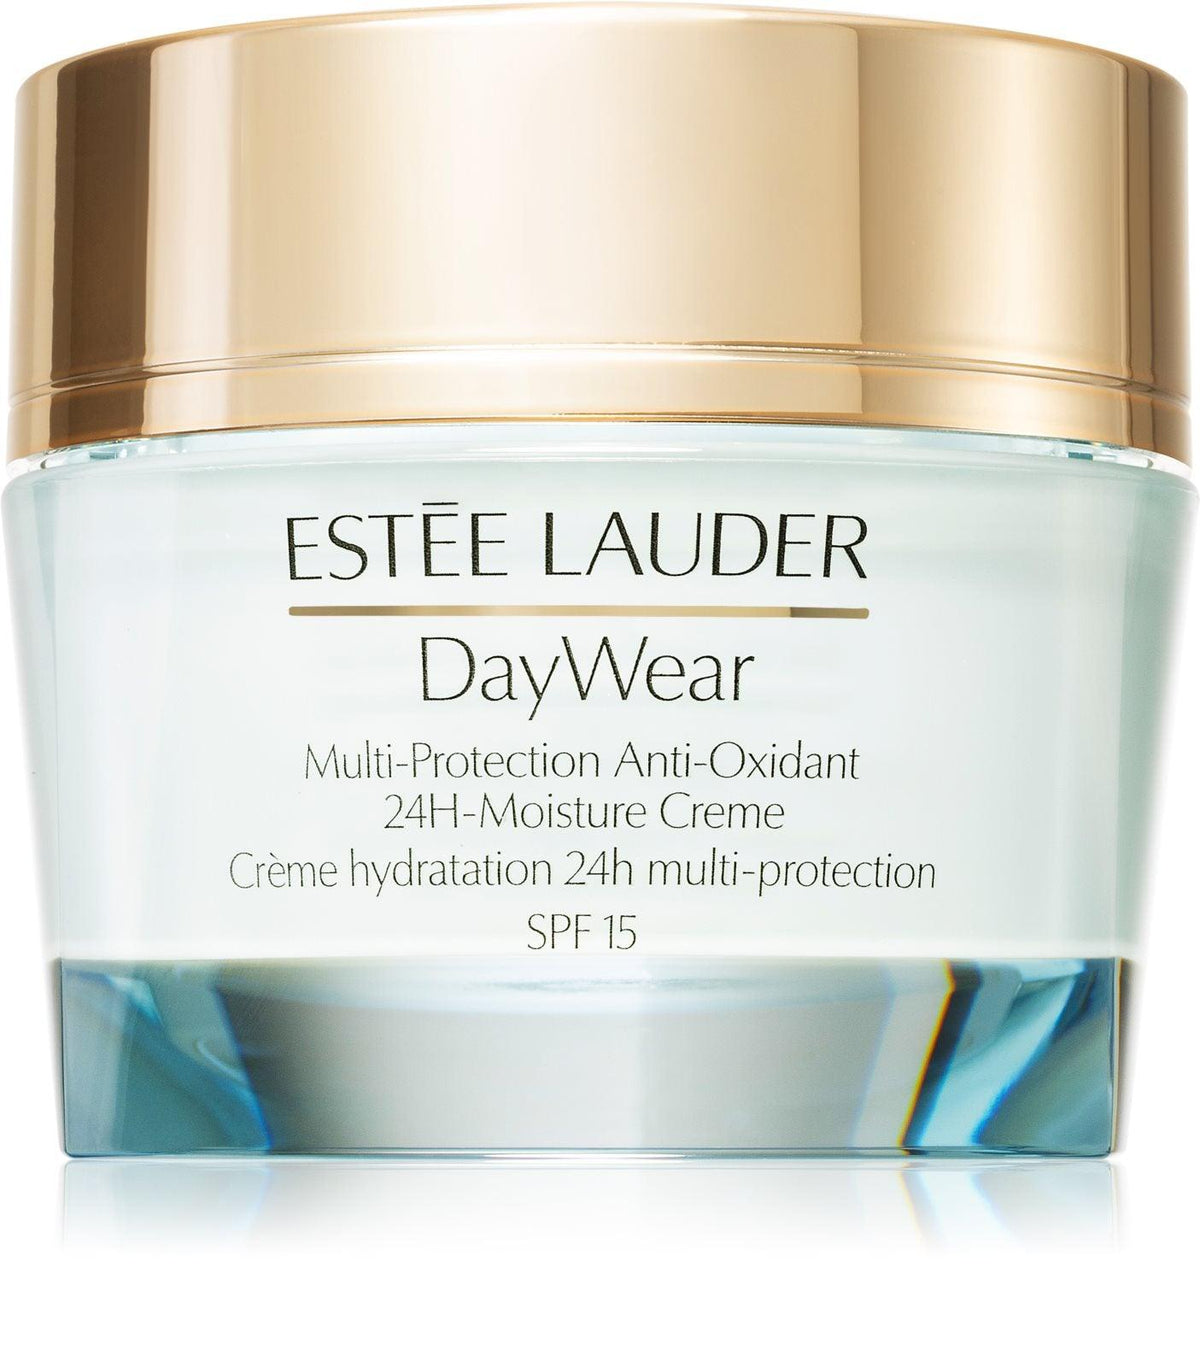 Estee Lauder DayWear Multi-Protection Anti-Oxidant 24H-Moisture Creme - Protective Day Cream for Normal and Combination Skin - Perfume Oasis